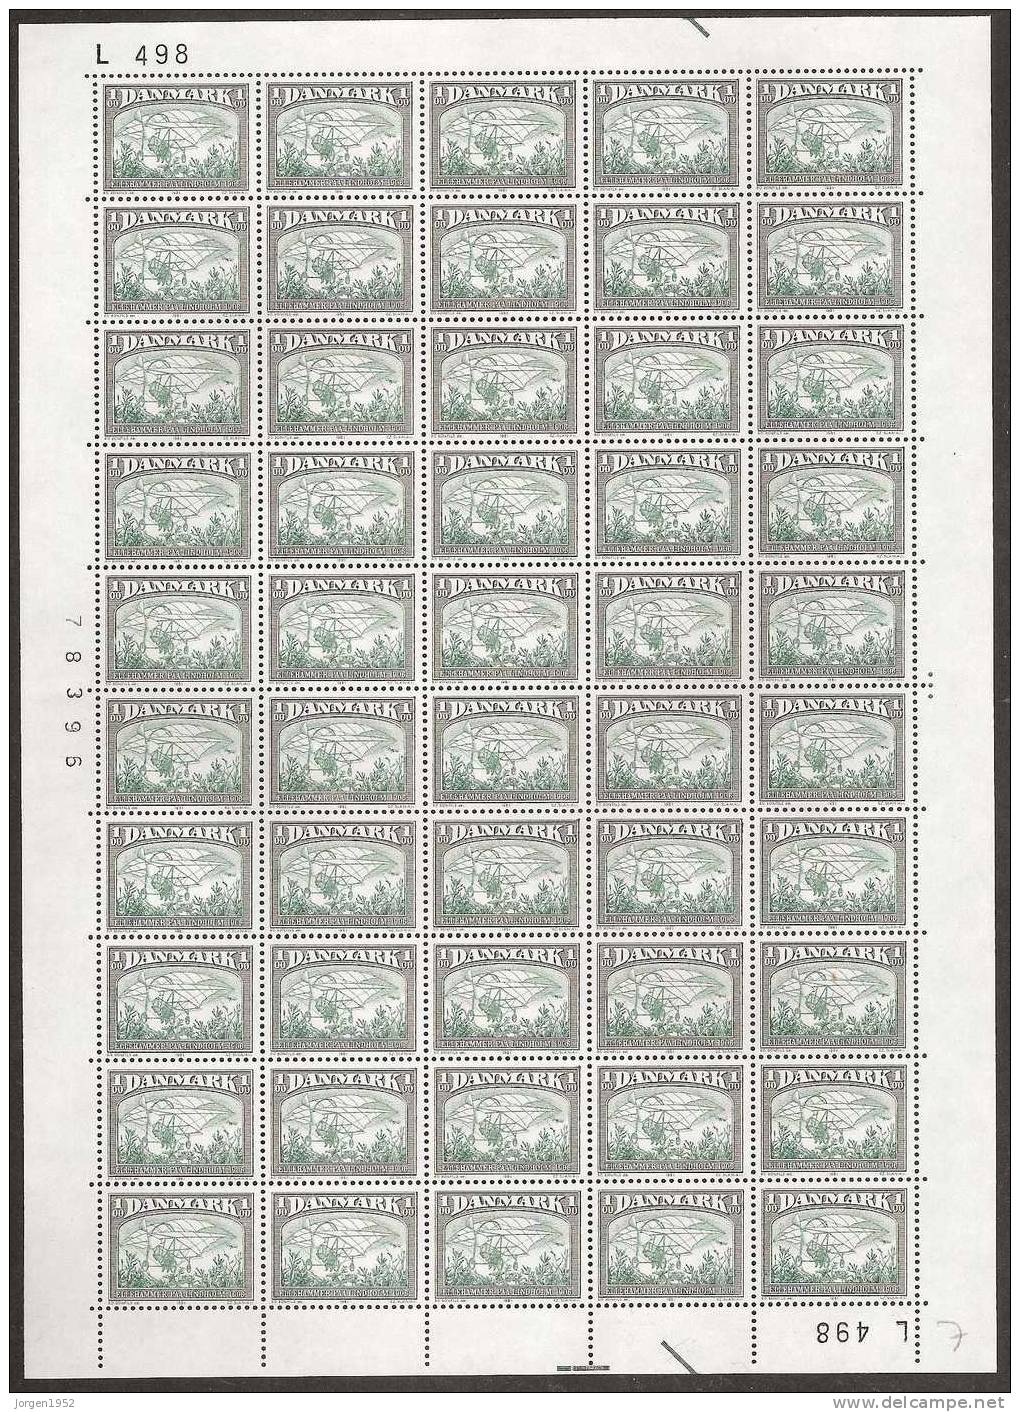 DENMARK SHEETS  FROM  YEAR 1981  MARGINAL NUMBER L 498 - Fogli Completi